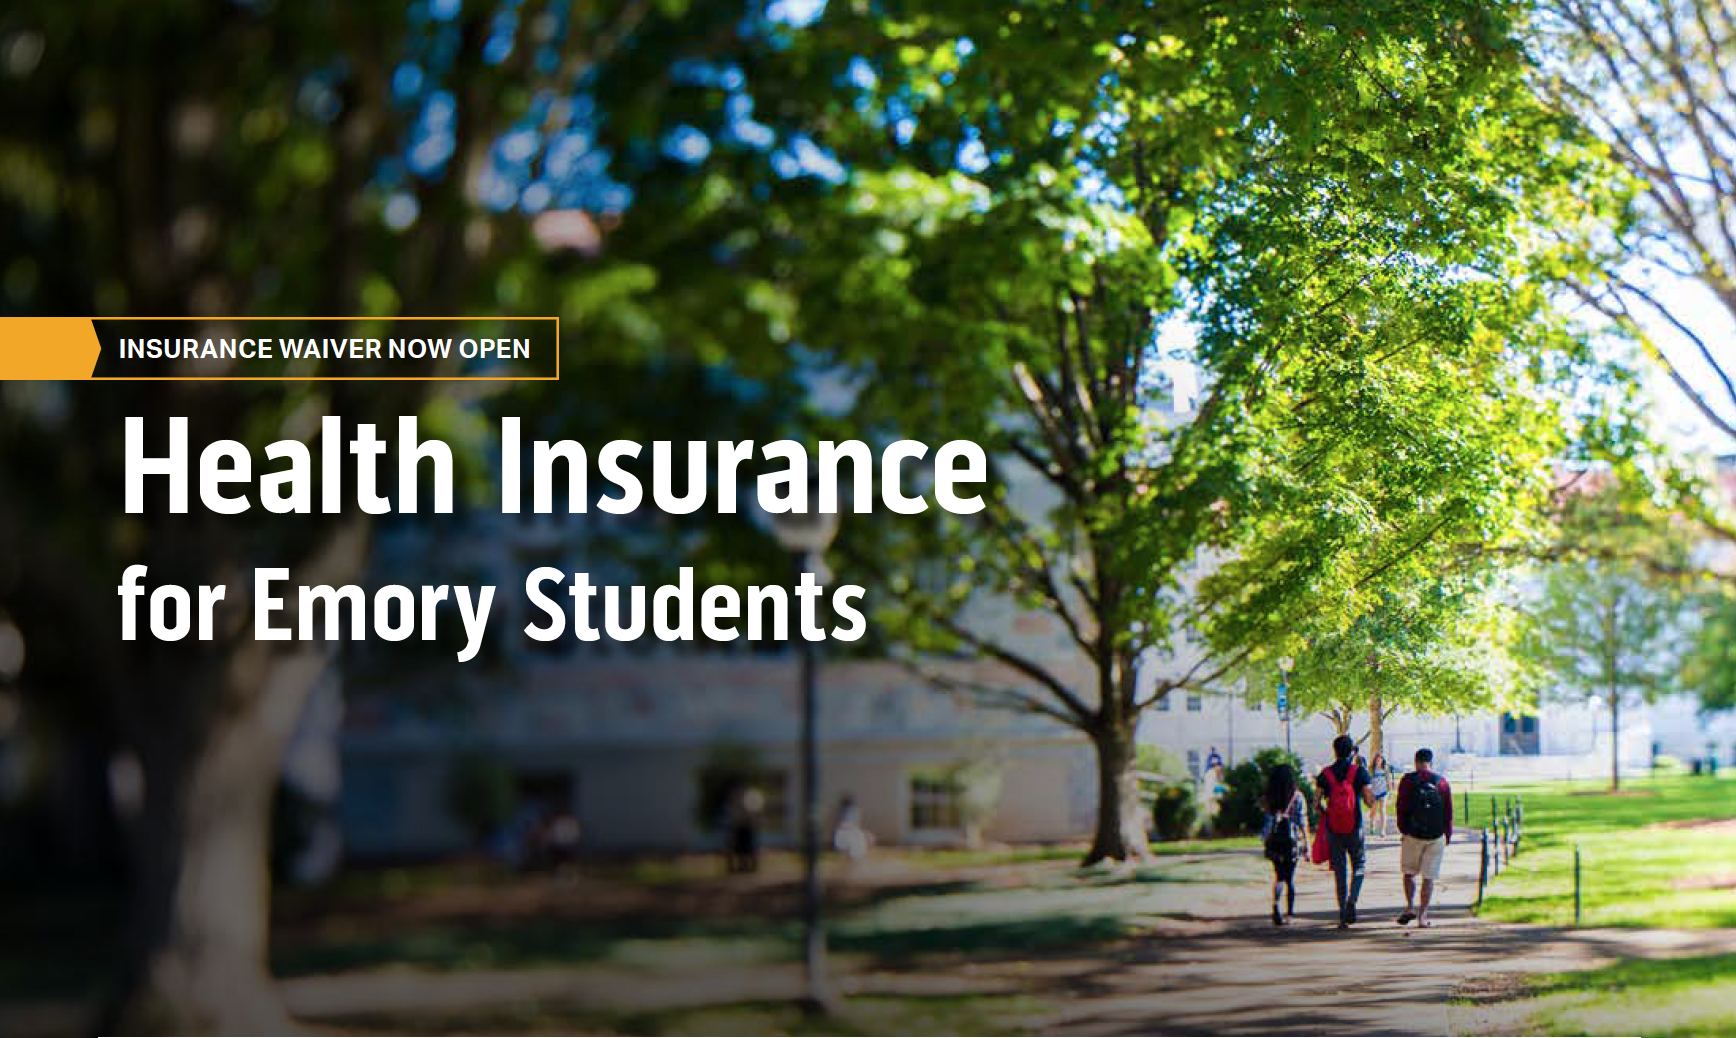 Student Health Insurance Waiver